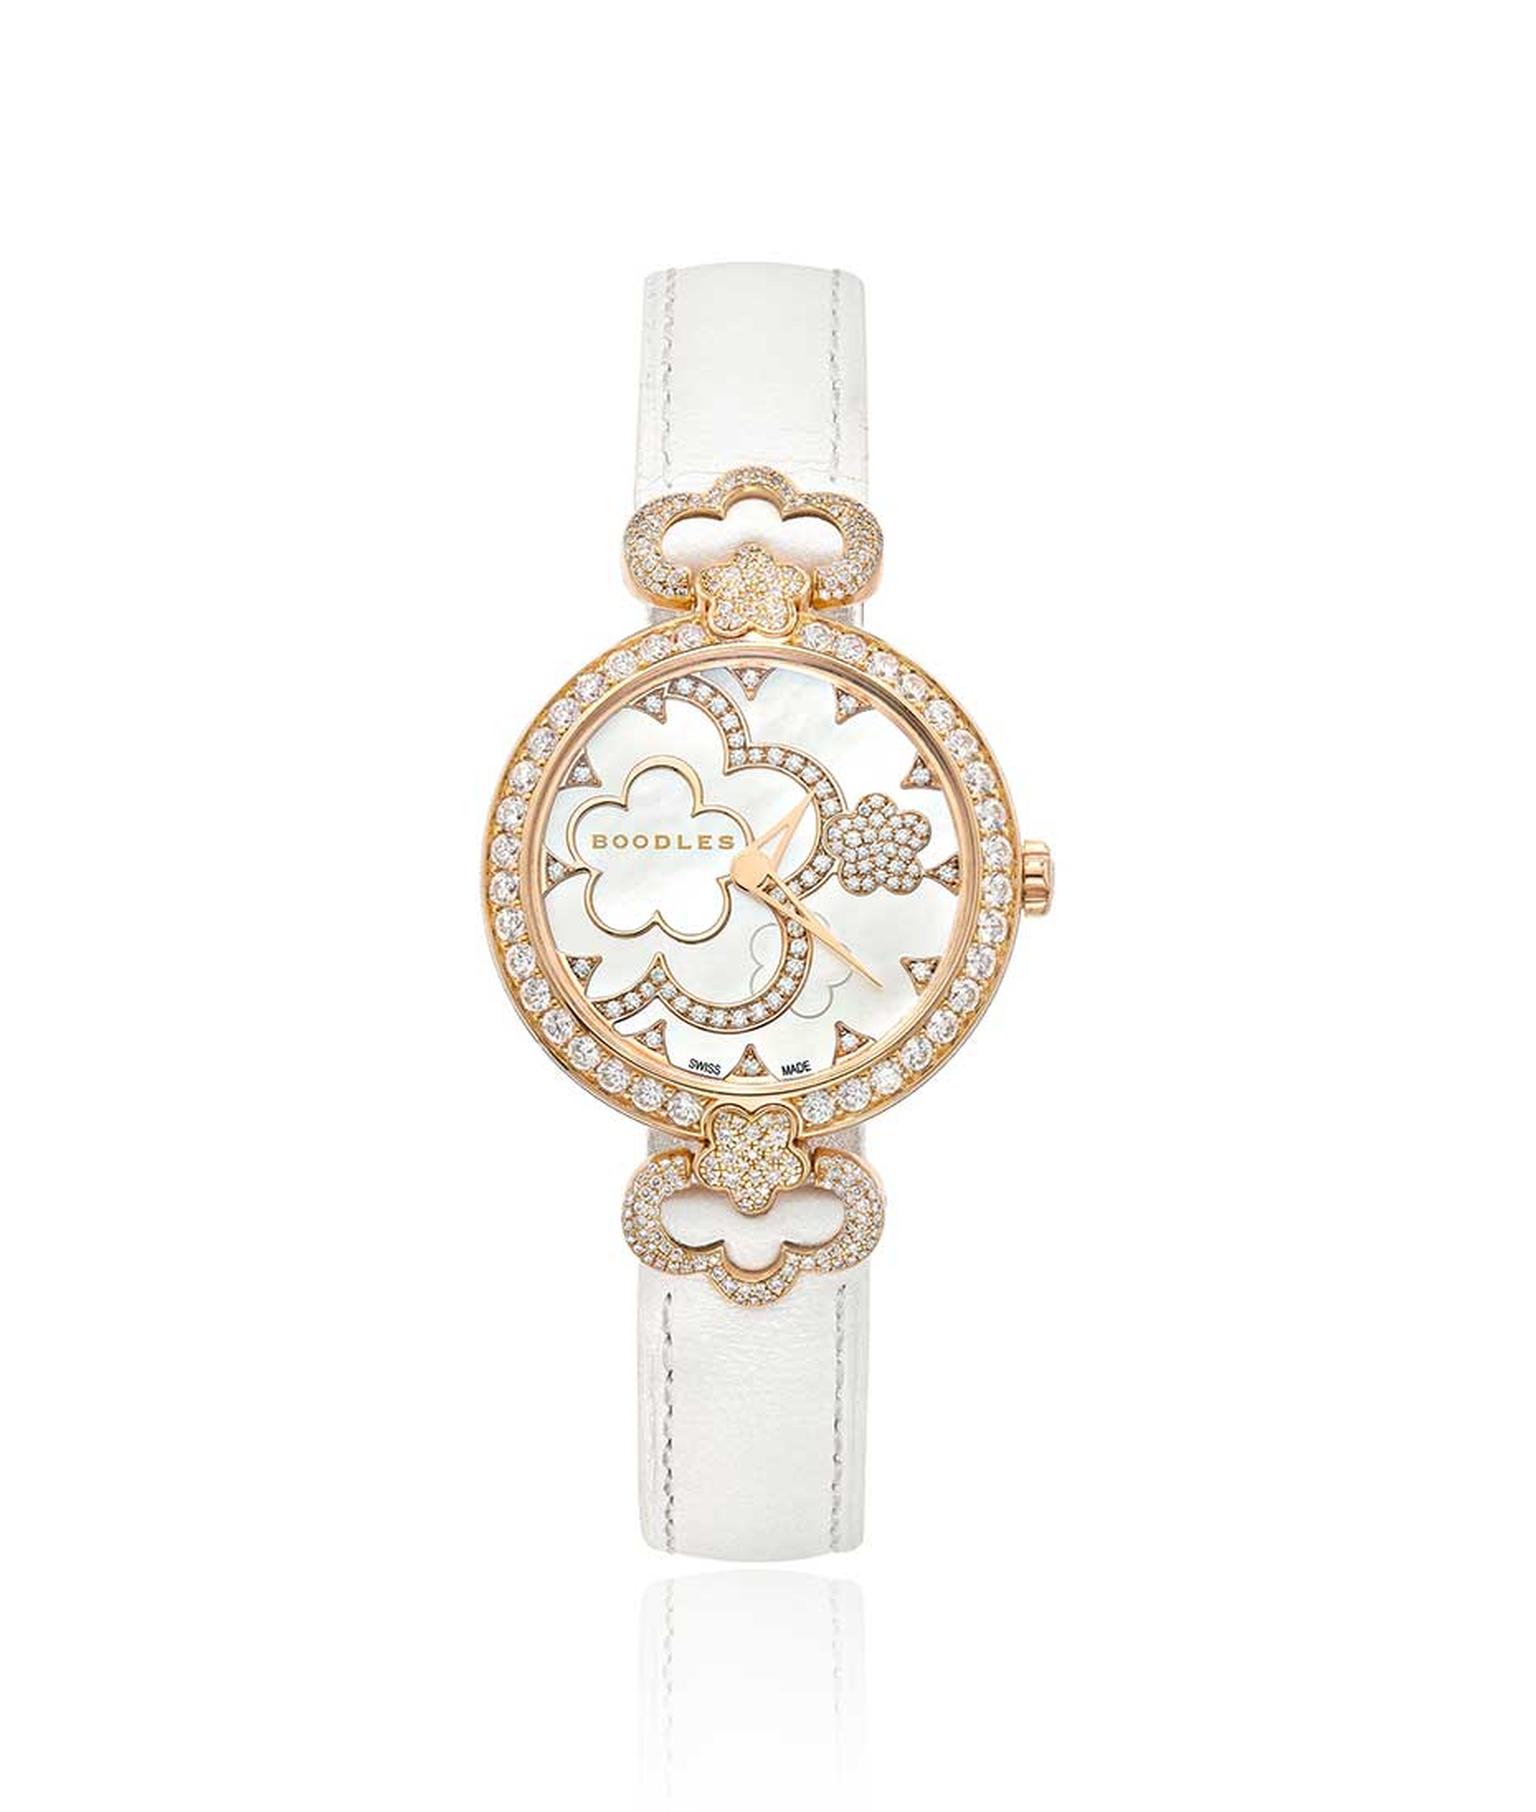 Boodles 28mm Blossom watch in rose gold with diamonds and a mother-of-pearl dial.